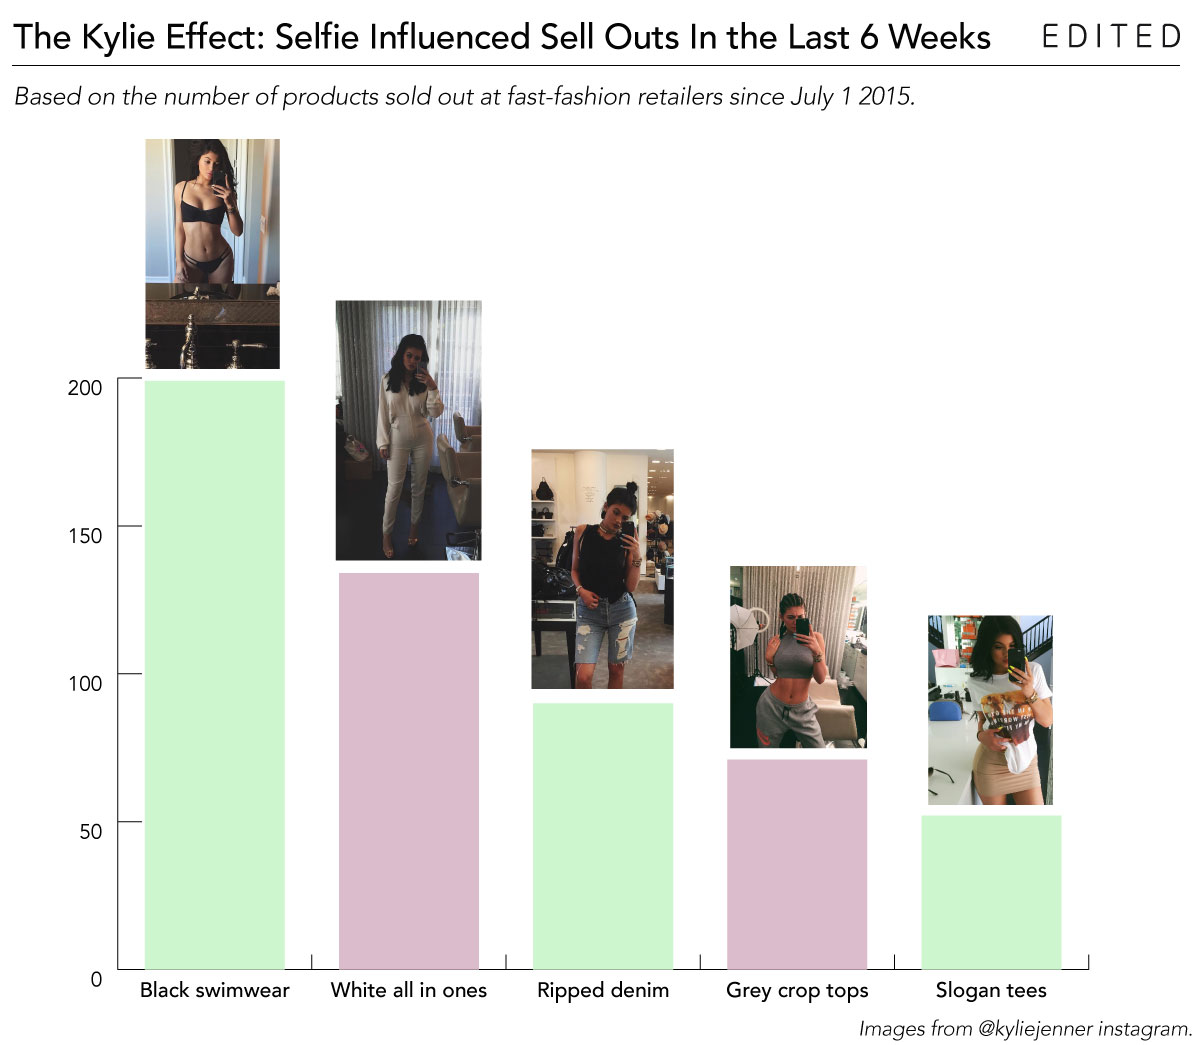 The Kylie Effect On Retail.